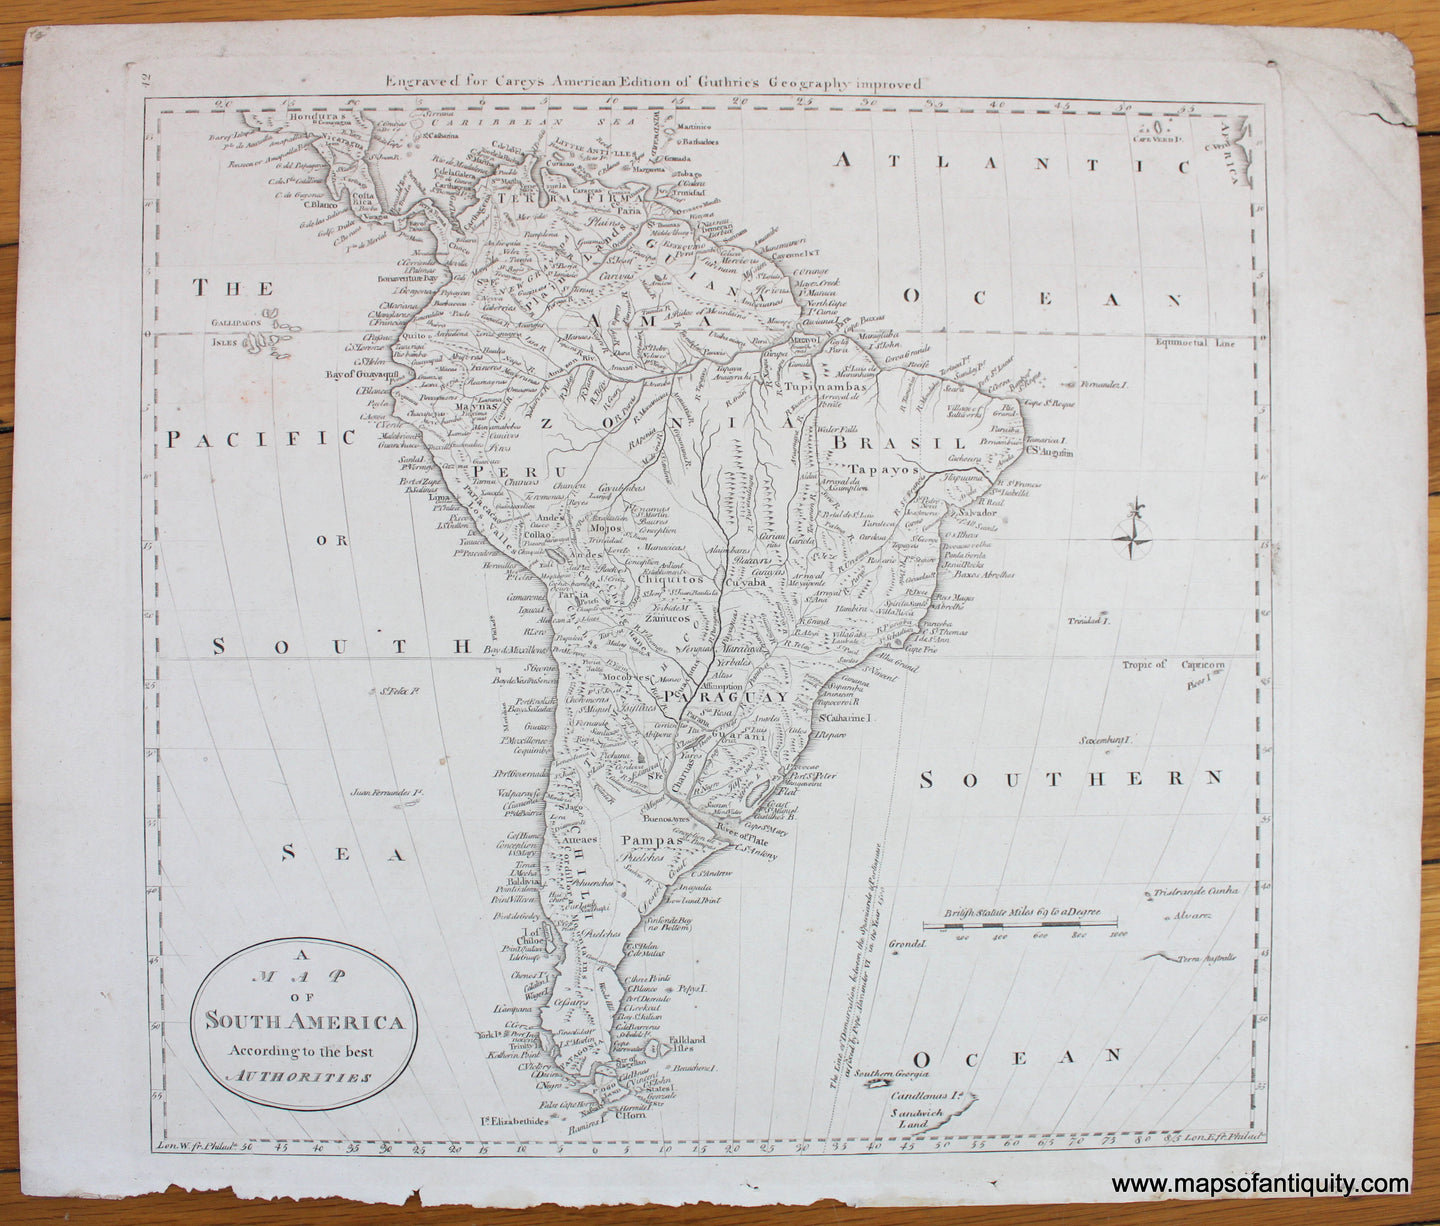 Antique-Map-A-of-South-America-According-to-The-Best-Authorities-Carey-Carey's-American-Edition-of-Guthrie's-Geography-Improved-Maps-of-Antiquity